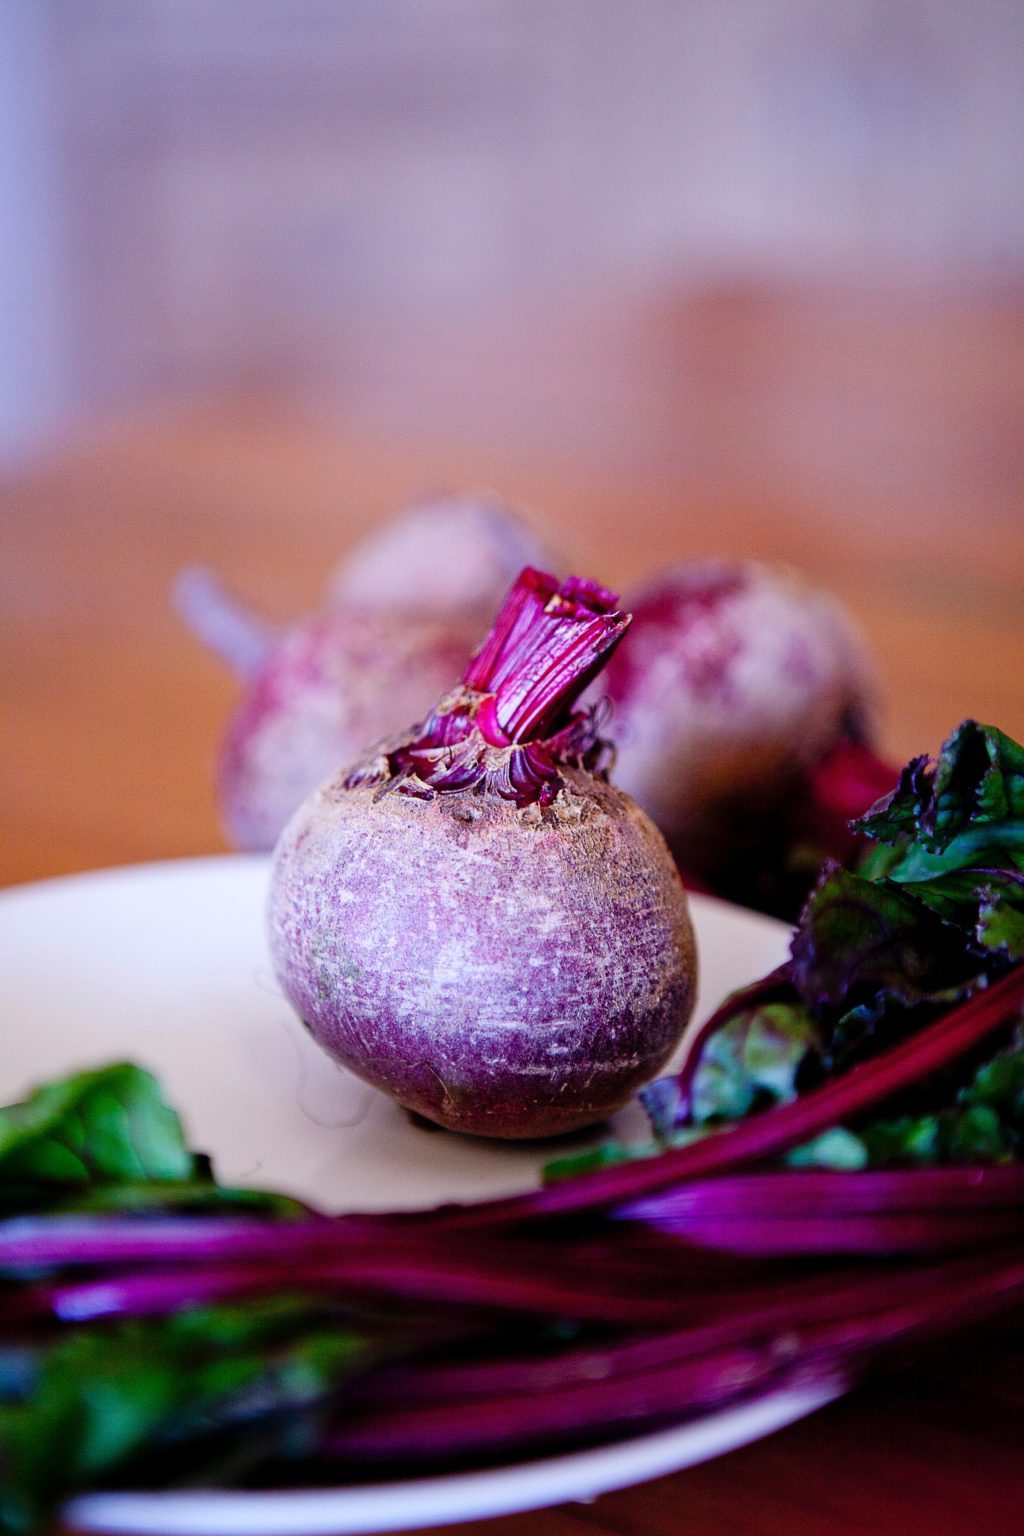 Beetroot Systemic Detoxifer and Nutritional Powerhouse